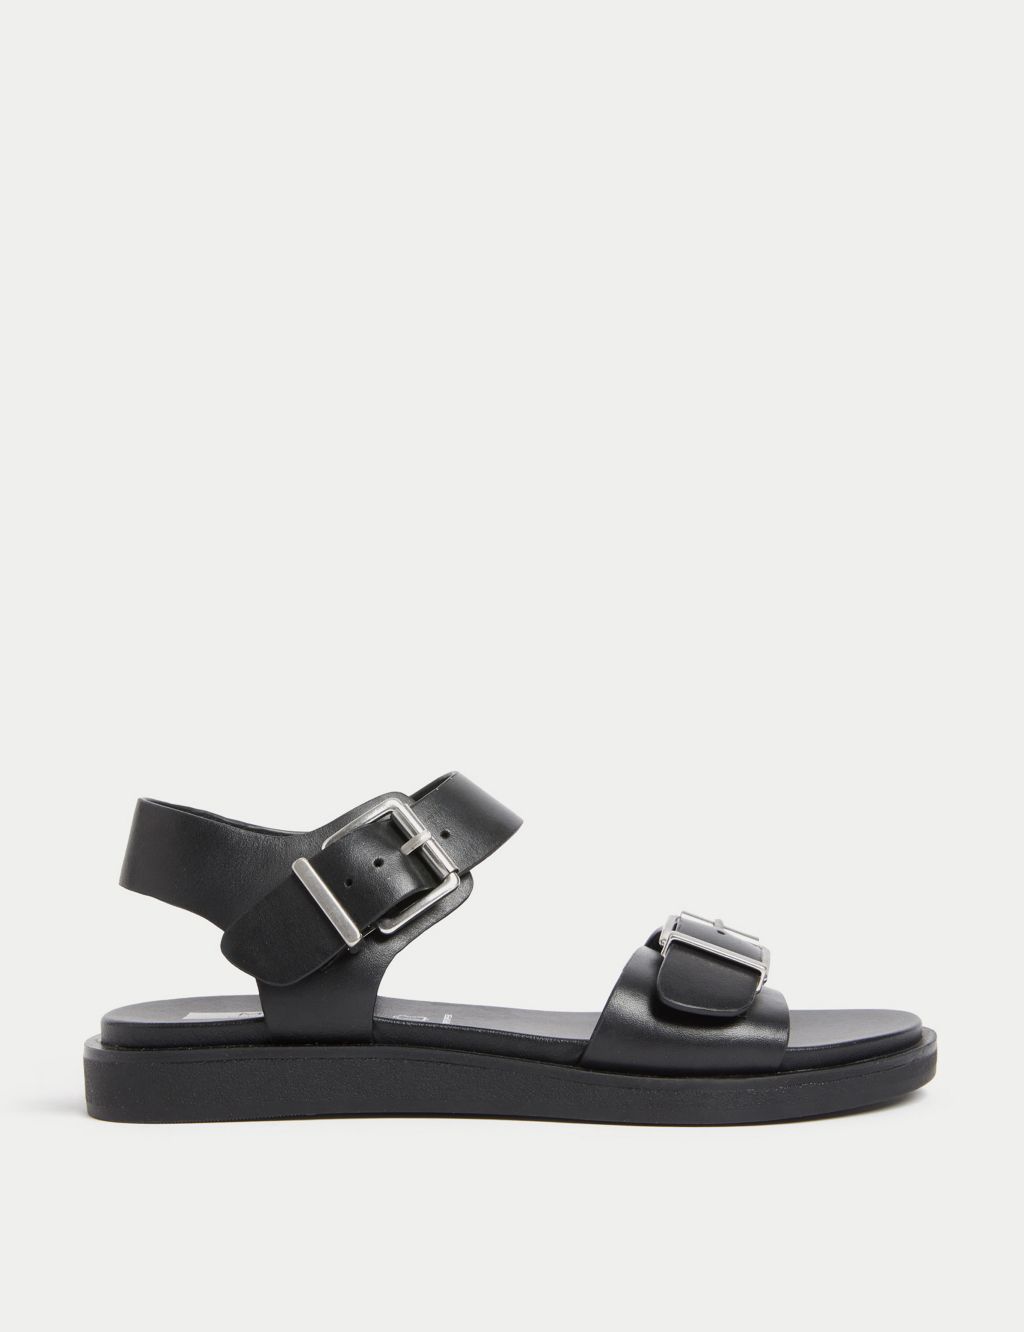 Leather Buckle Flat Sandals image 1